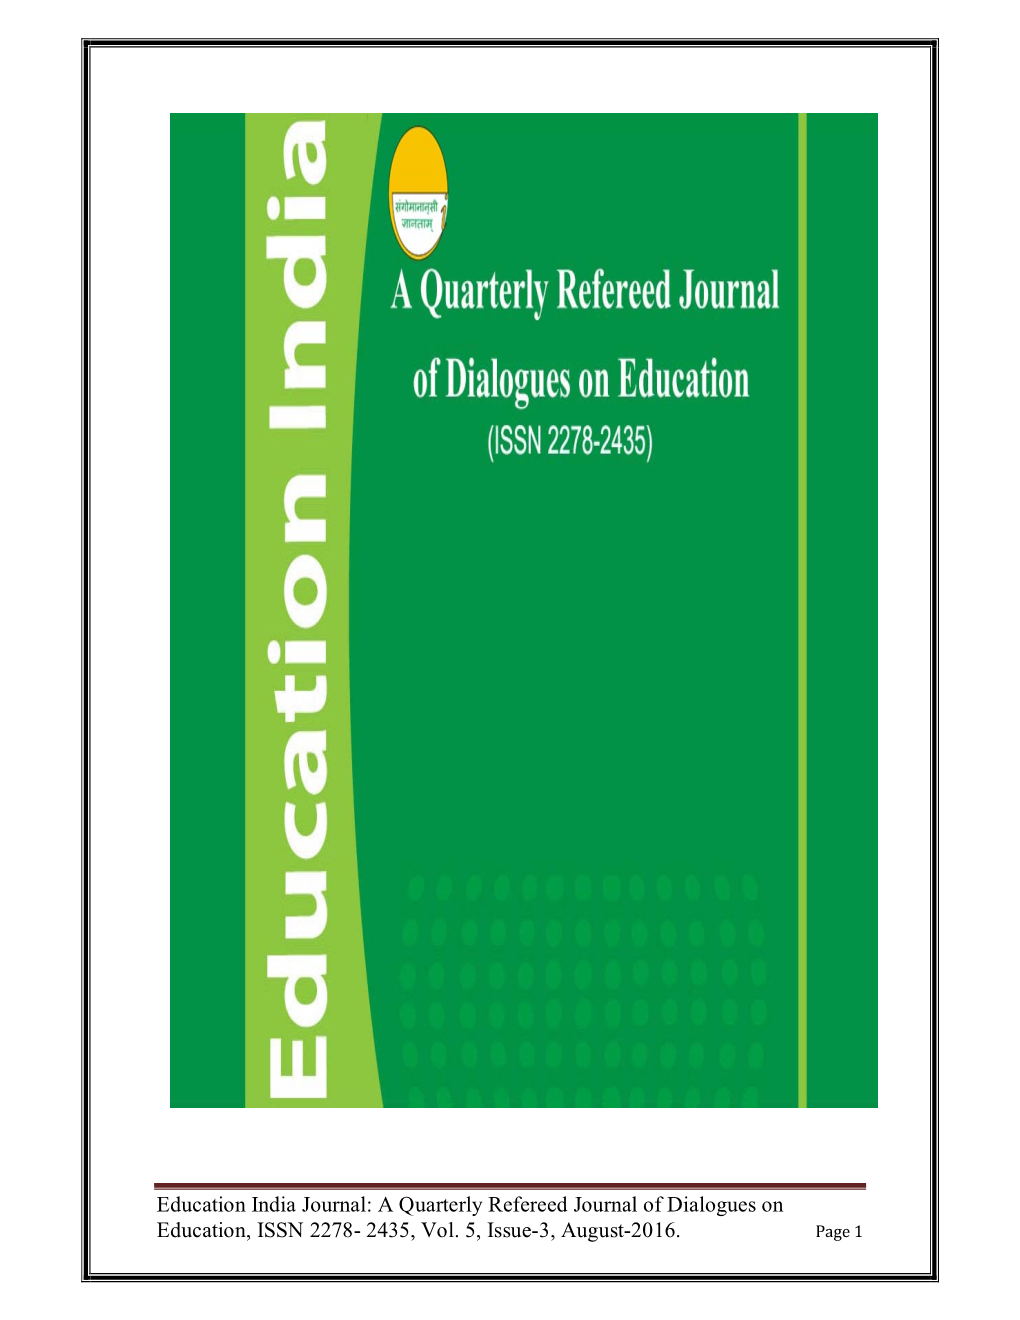 A Quarterly Refereed Journal of Dialogues on Education, ISSN 2278- 2435, Vol